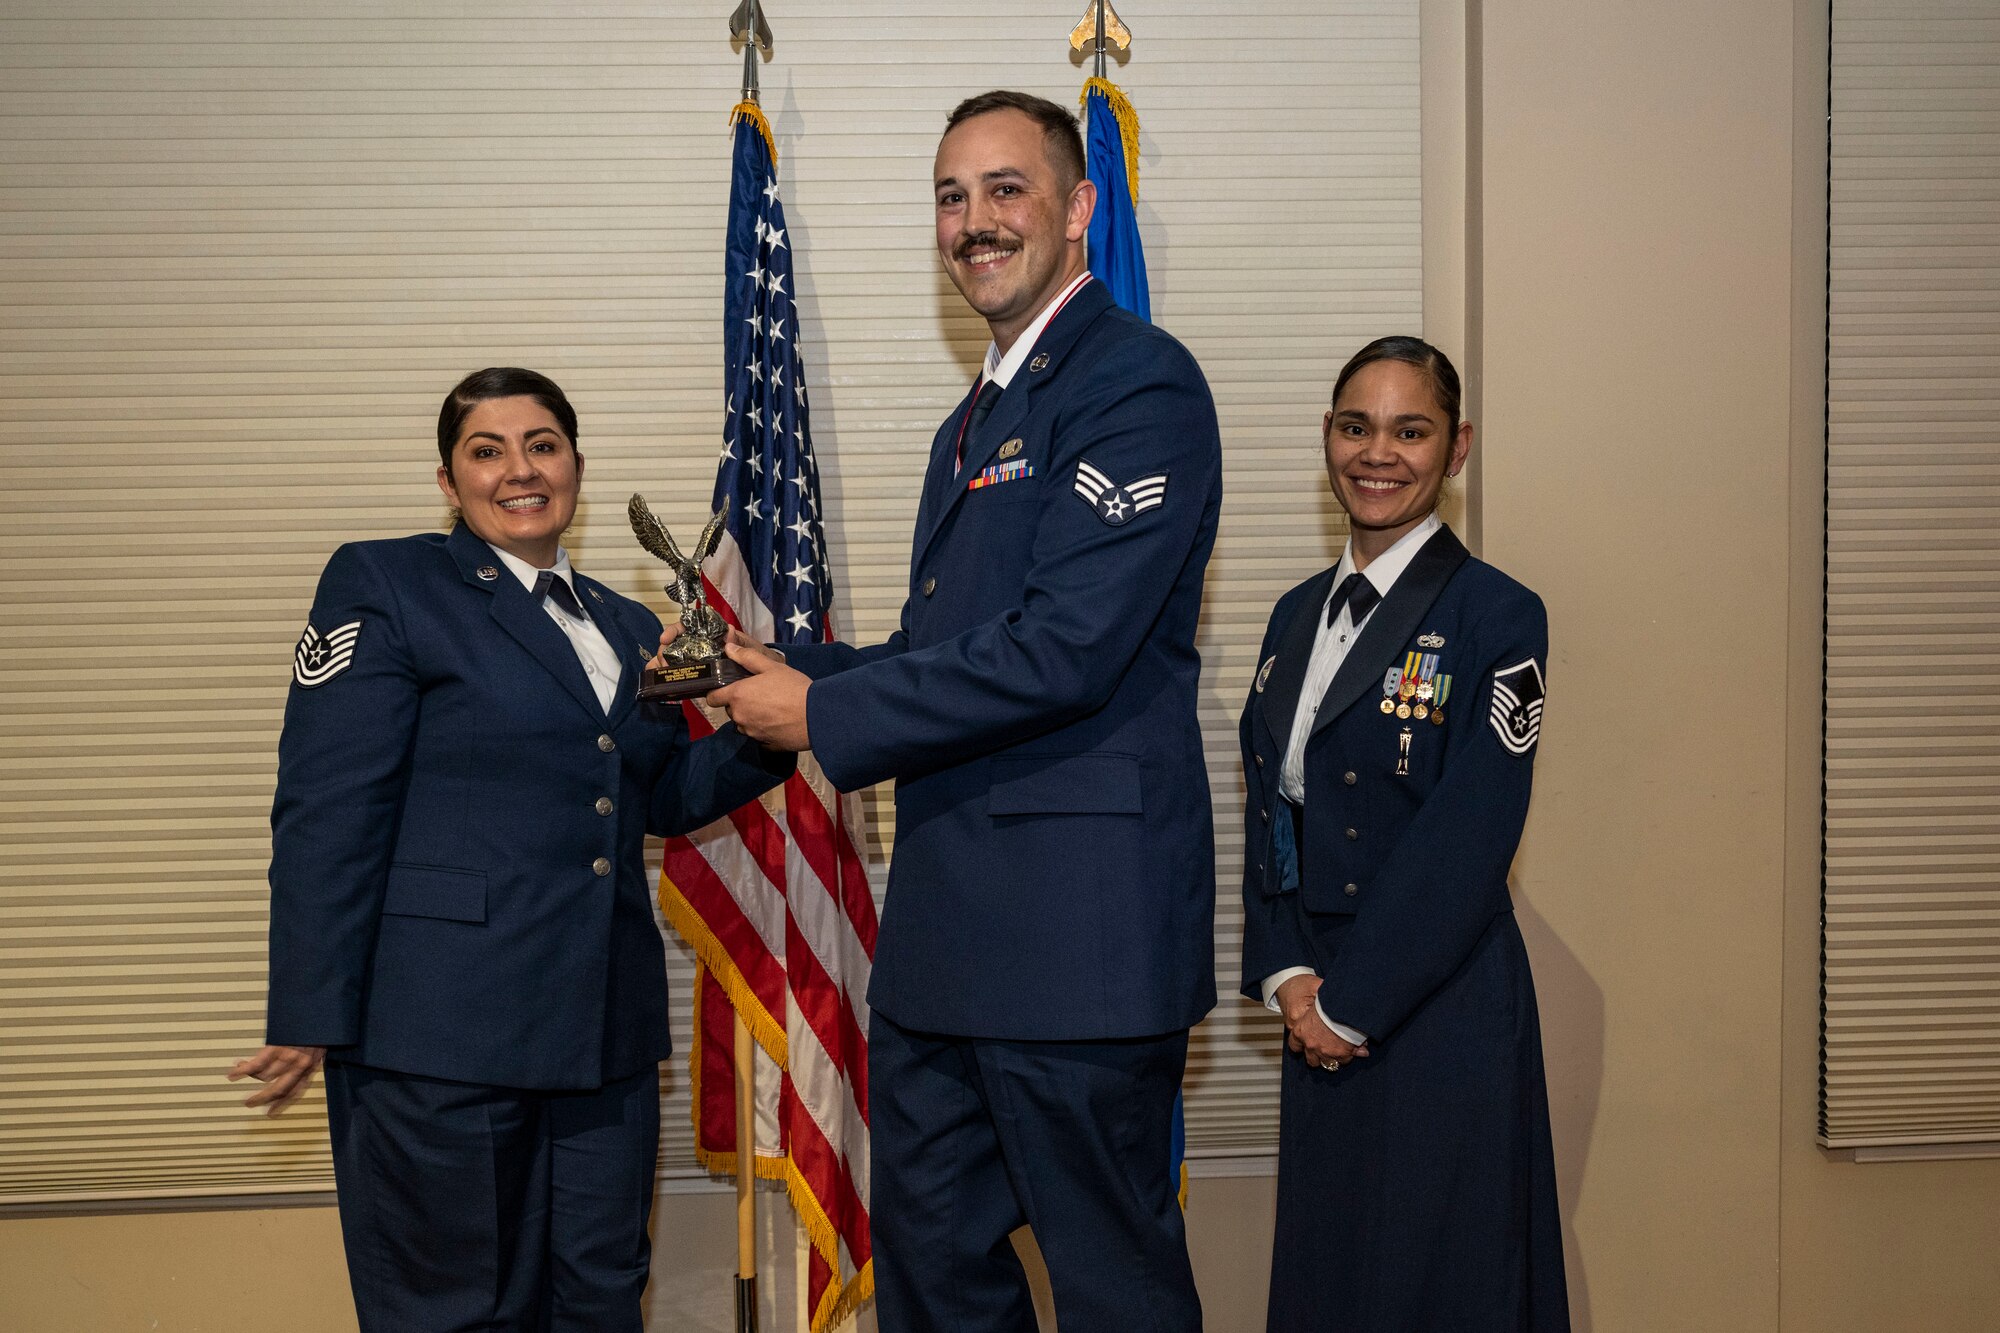 Senior Airman Joshua Strahin, 4th Operations Support Squadron airfield management operations supervisor, center, receives a distinguished graduate award from Tech. Sgt. Christine Intorre, 4th Component Maintenance Squadron electrical and environmental section chief, left, and Master Sgt. Sherri Santos-Orton, 334th Fighter Generation Squadron weapons section chief, during the Airman Leadership School Class 23-B graduation ceremony at Seymour Johnson Air Force Base, North Carolina, Feb. 9, 2023. Students who received the distinguished graduate award displayed effective teamwork, academic excellence and spirited leadership.